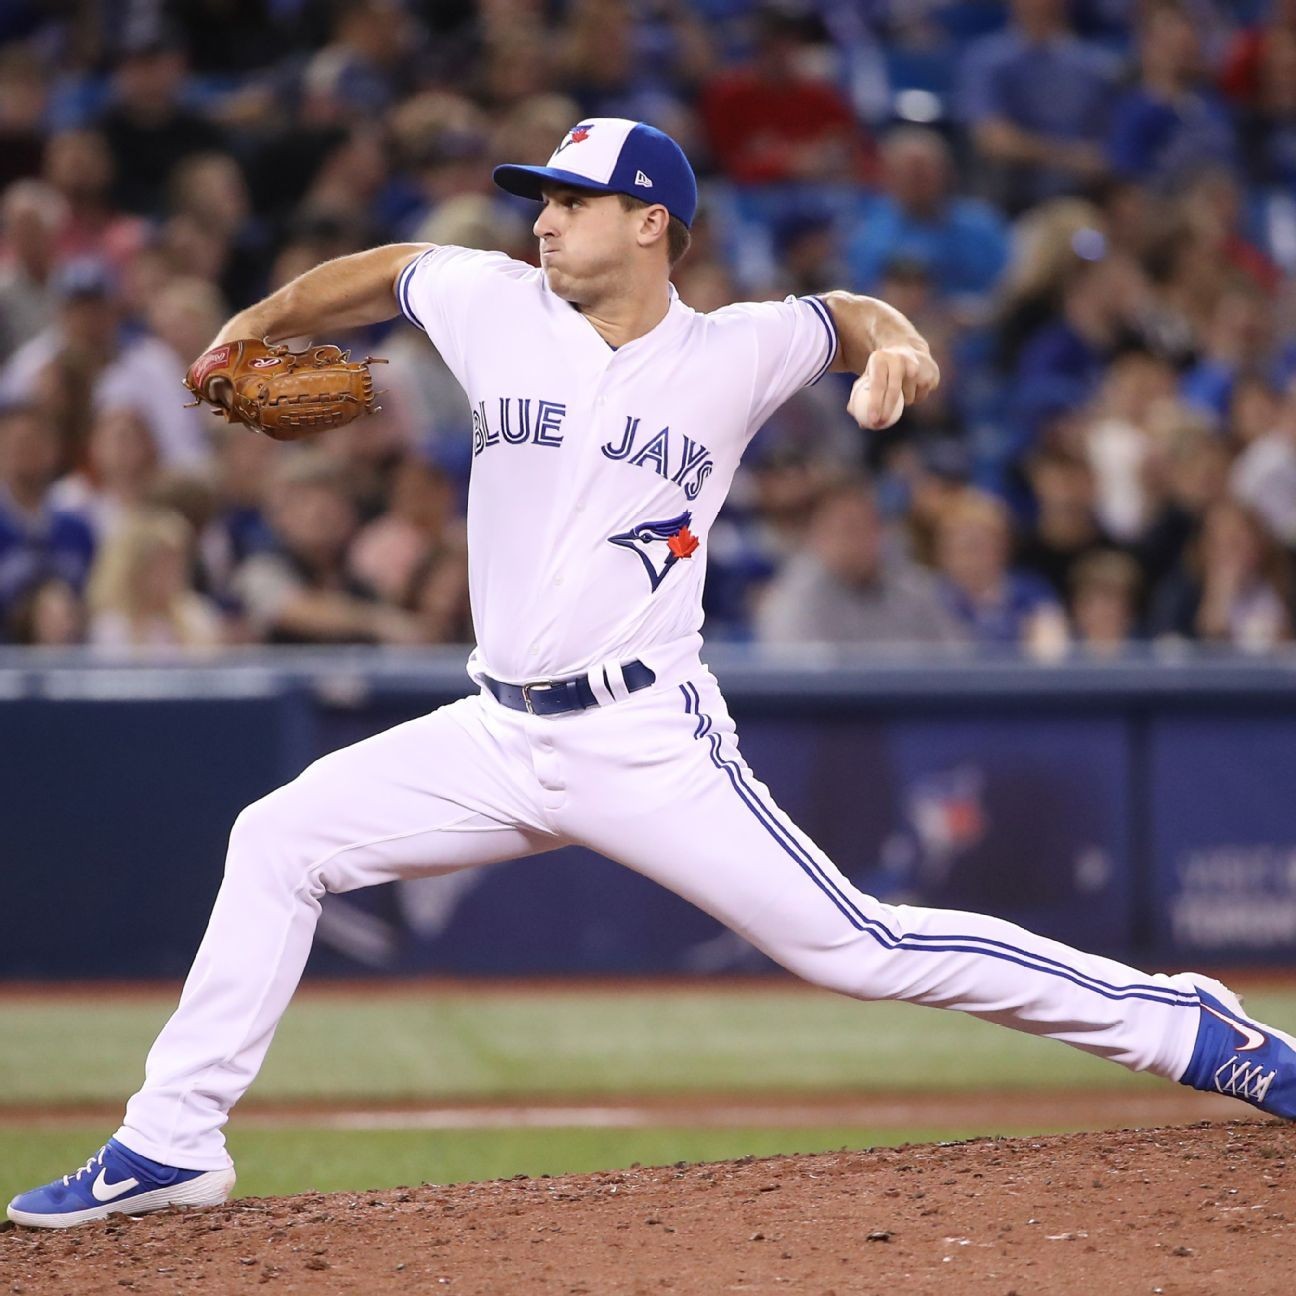 Blue Jays' Pannone strikes out side on 9 pitches